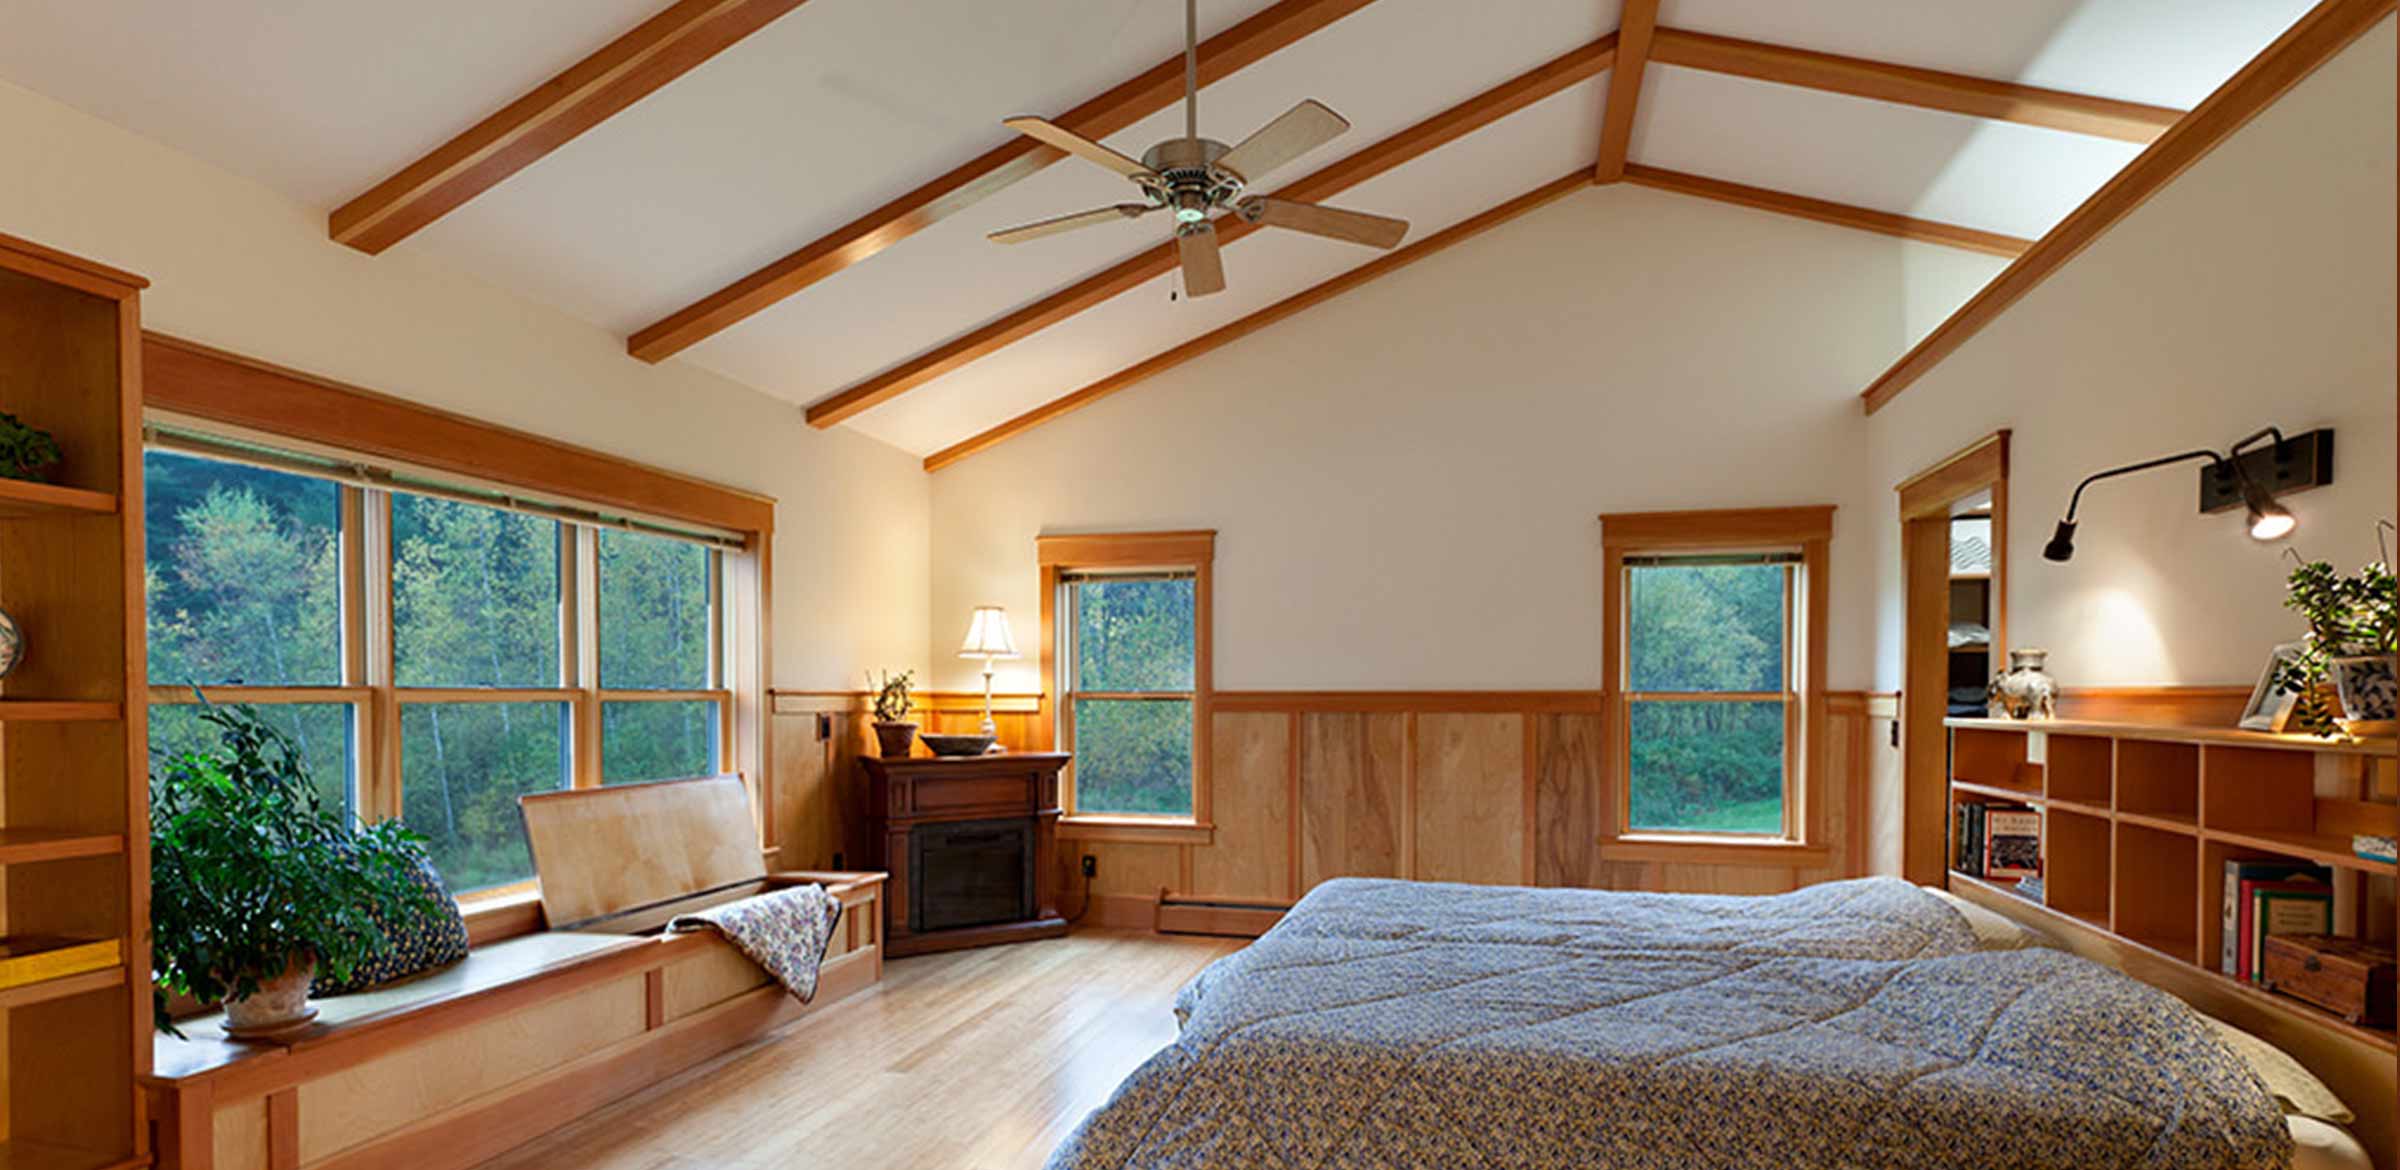 master bedroom with built in bench and exposed beams